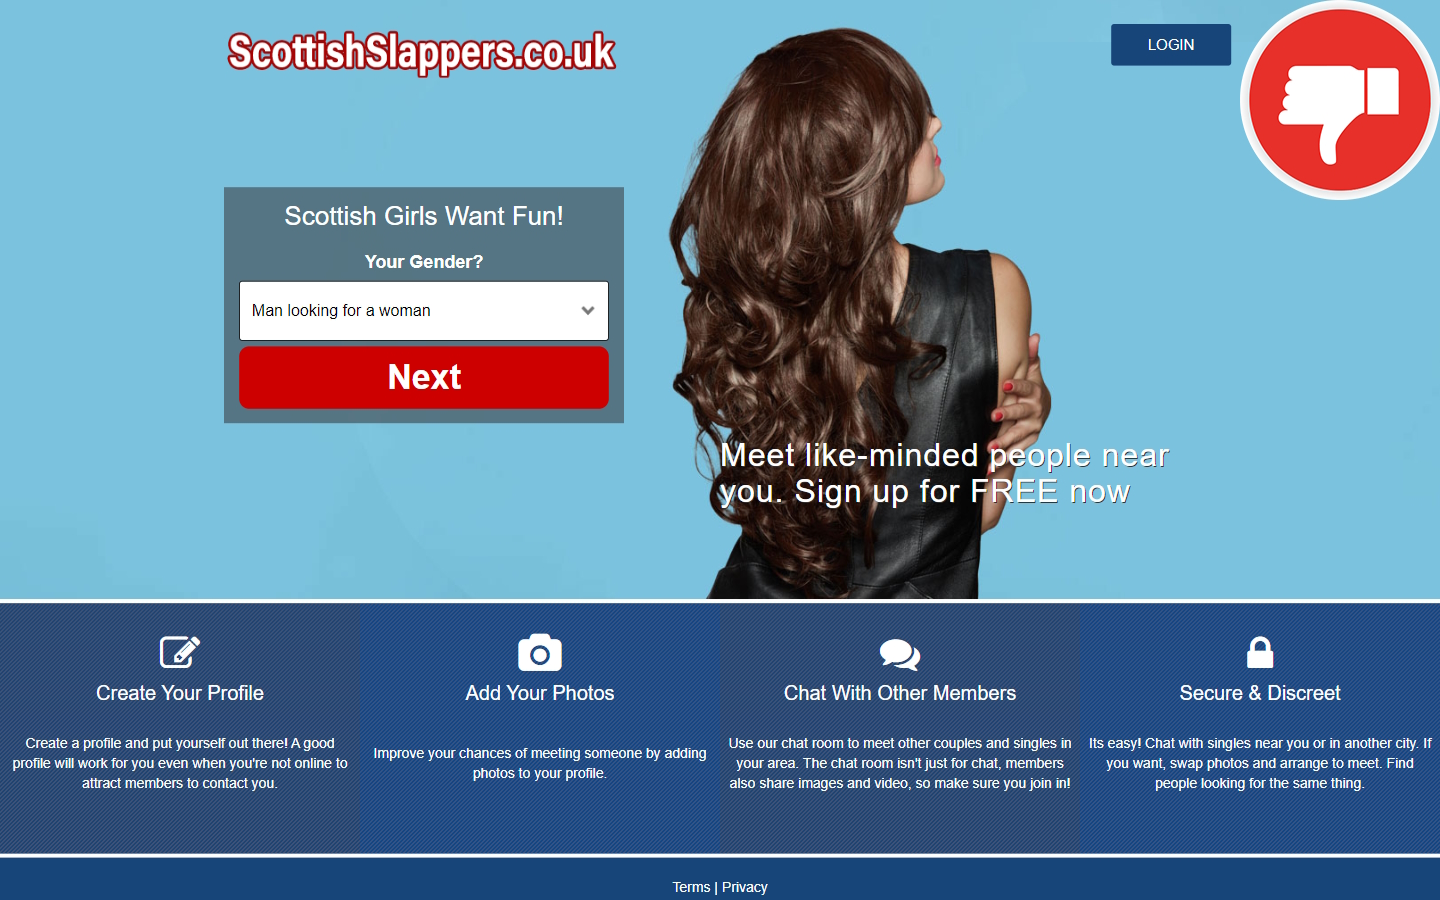 Review ScottishSlappers.co.uk Scam